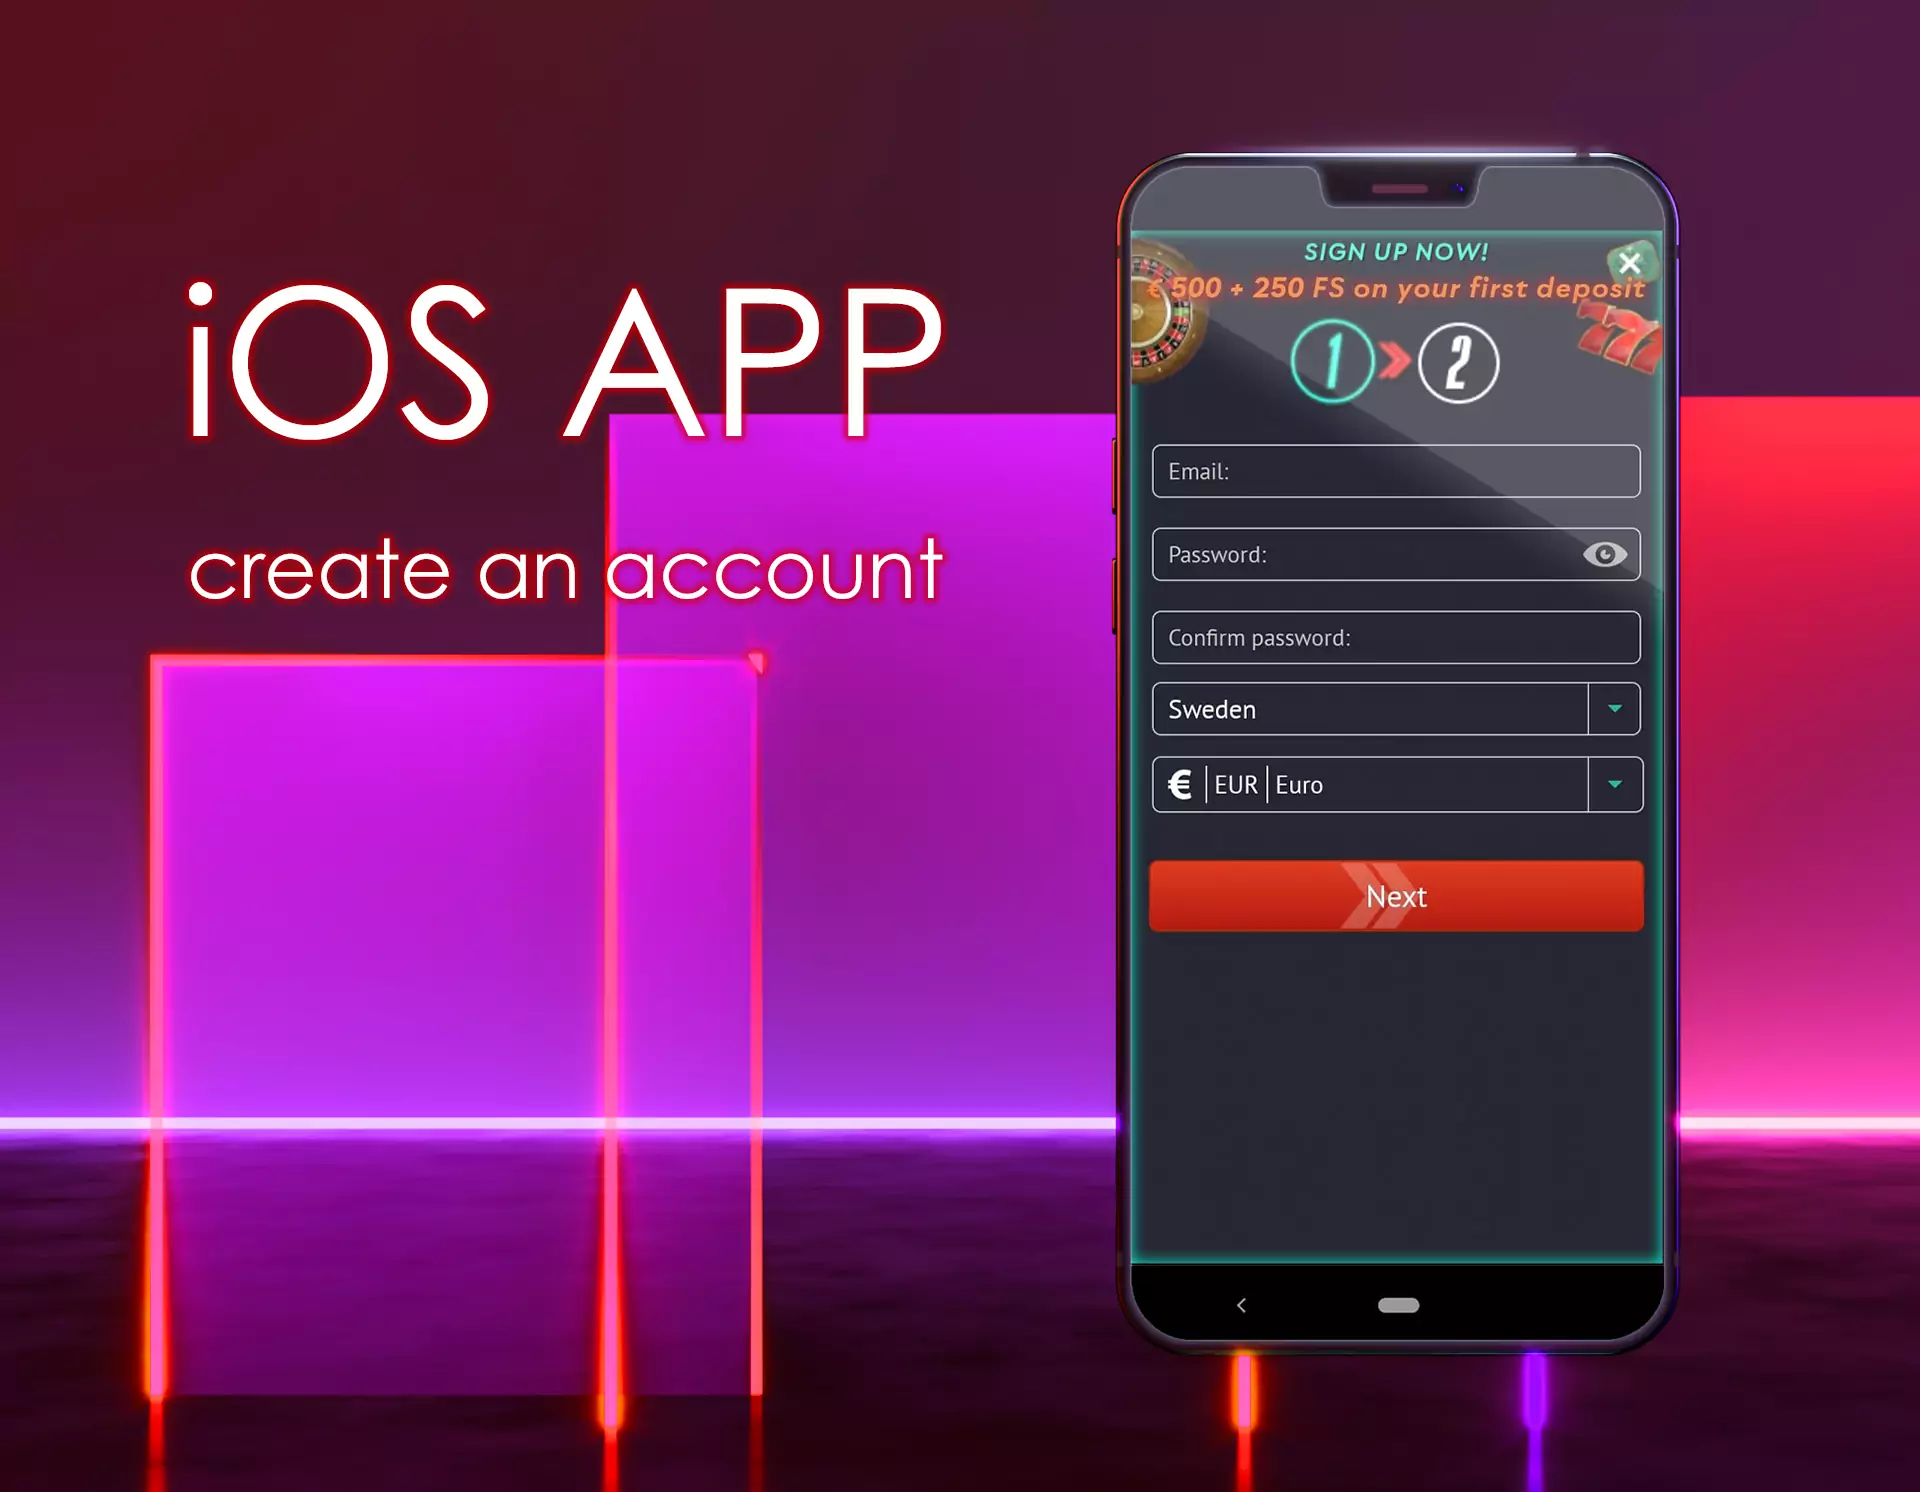 Run the app and sign in, or create an account if you haven't done it yet.